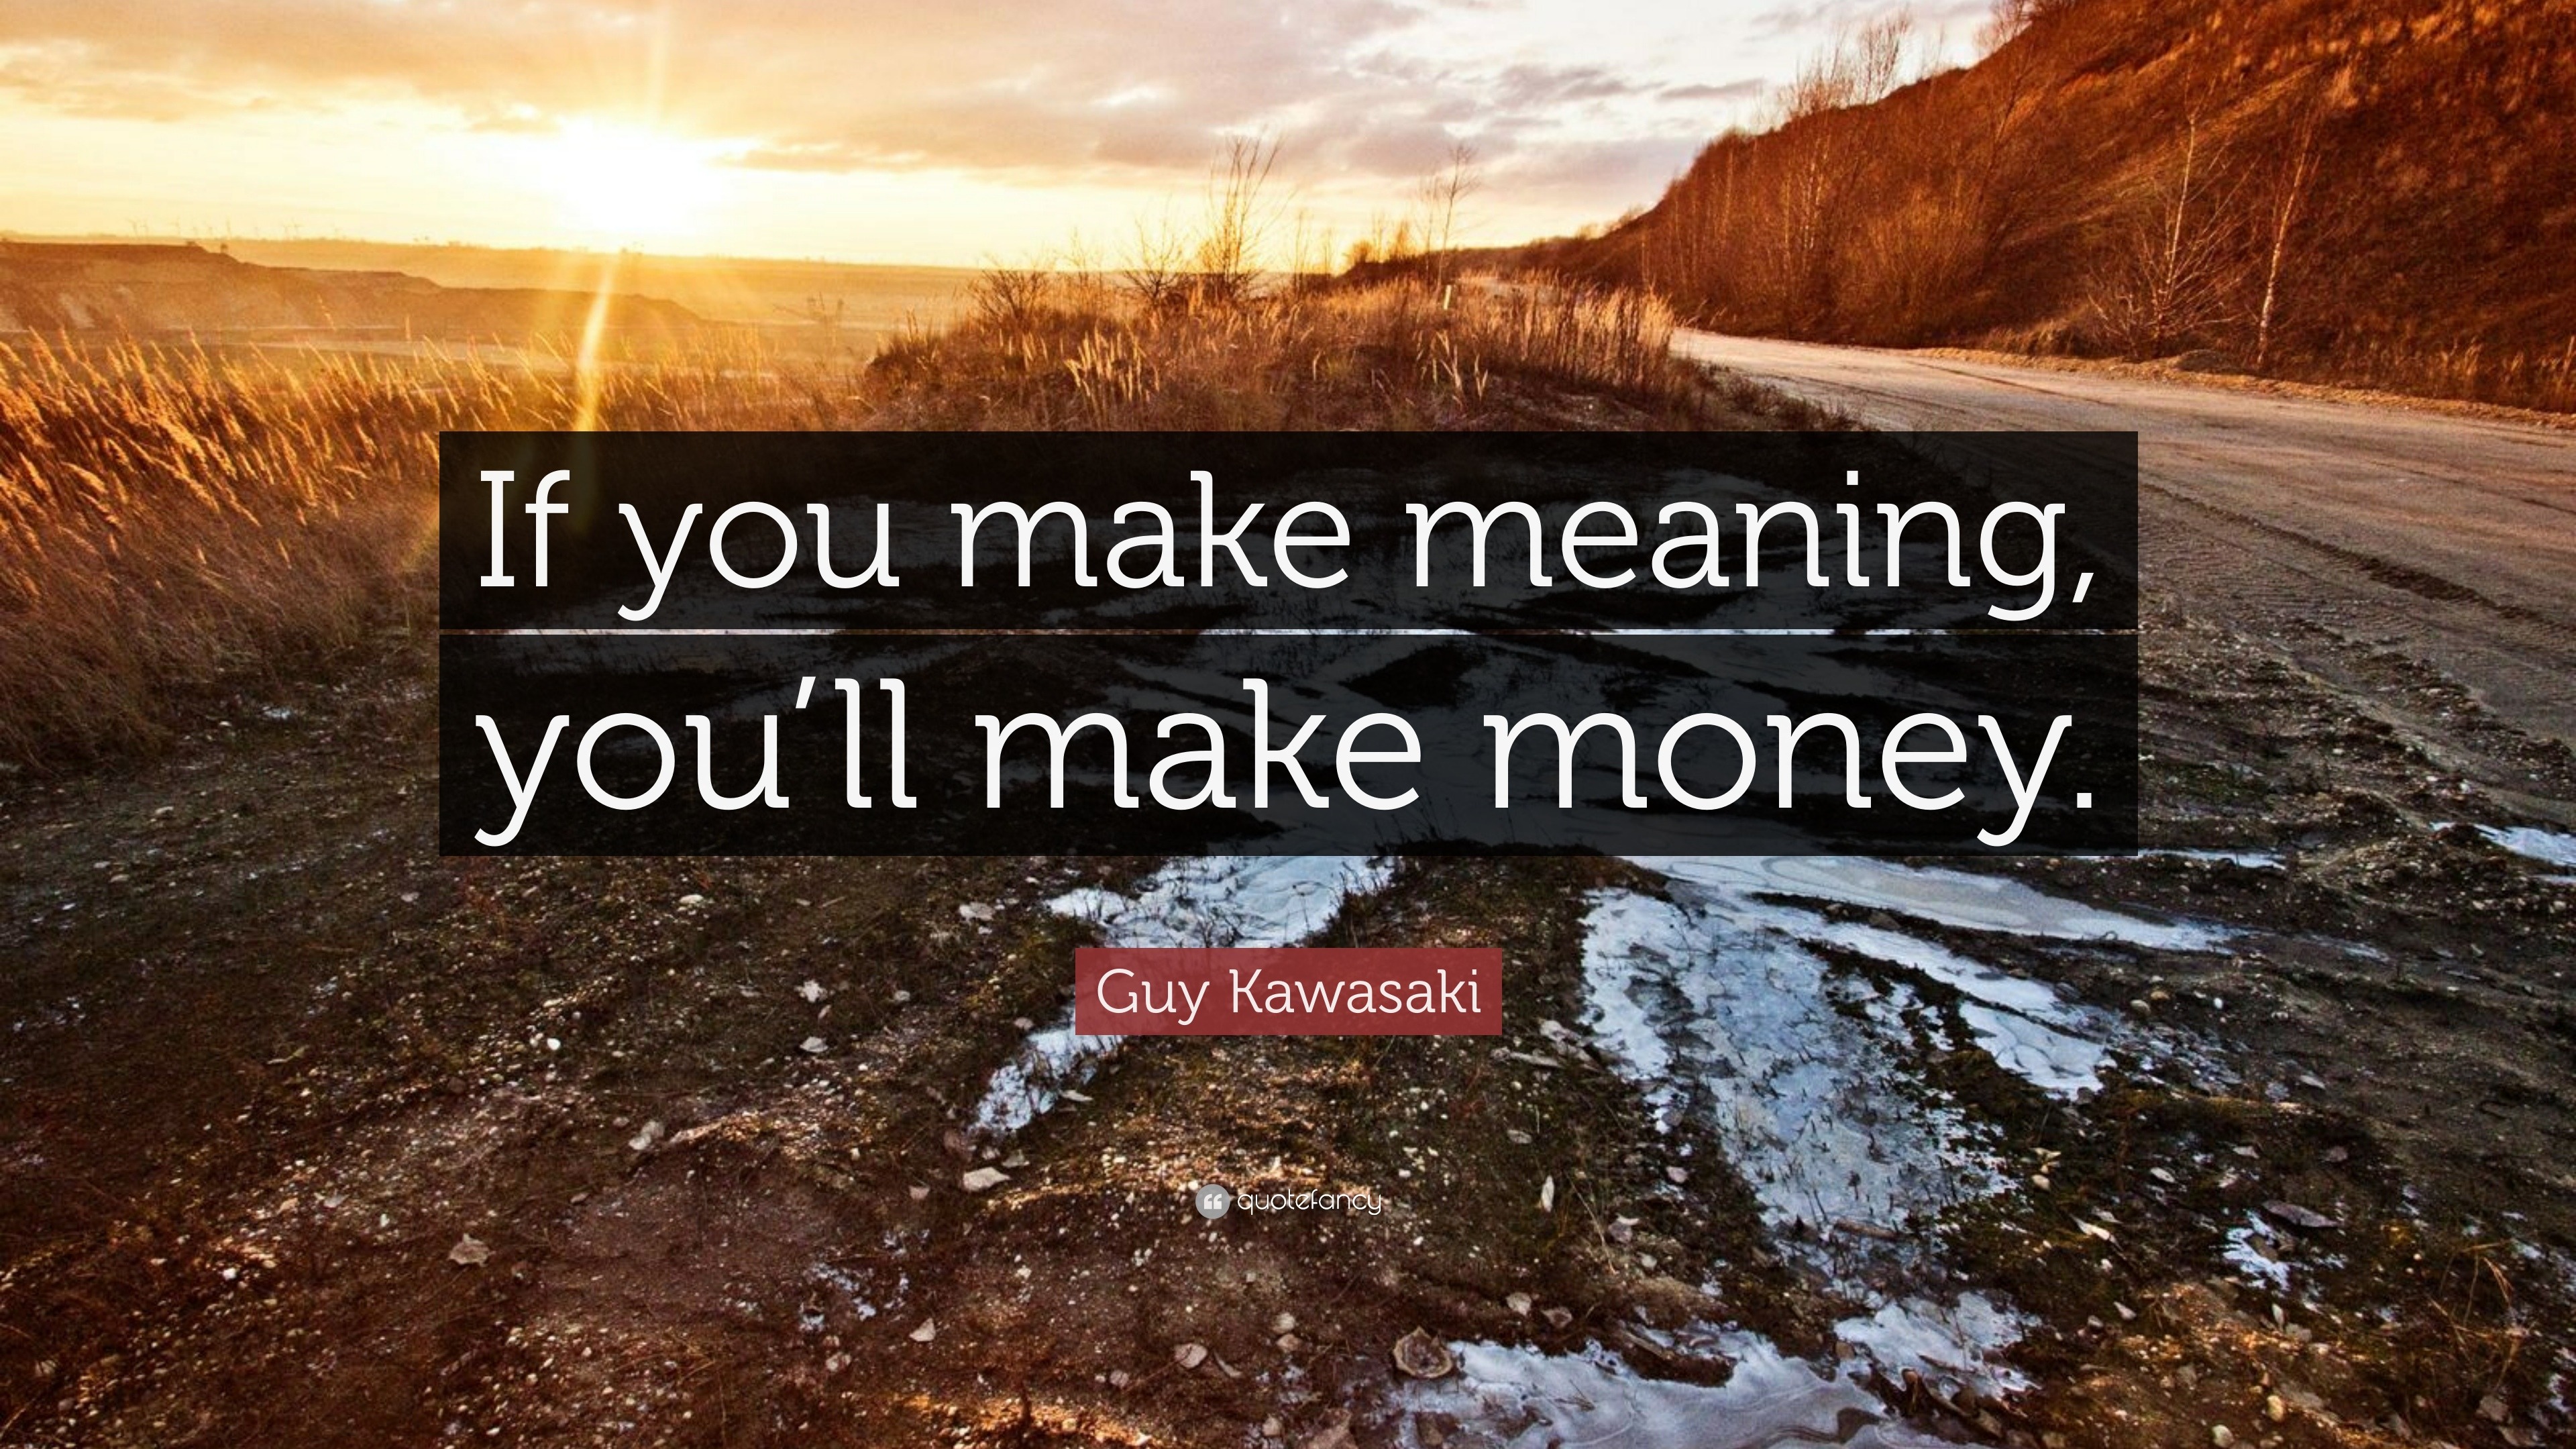 Making Money Quotes (40 wallpapers) - Quotefancy